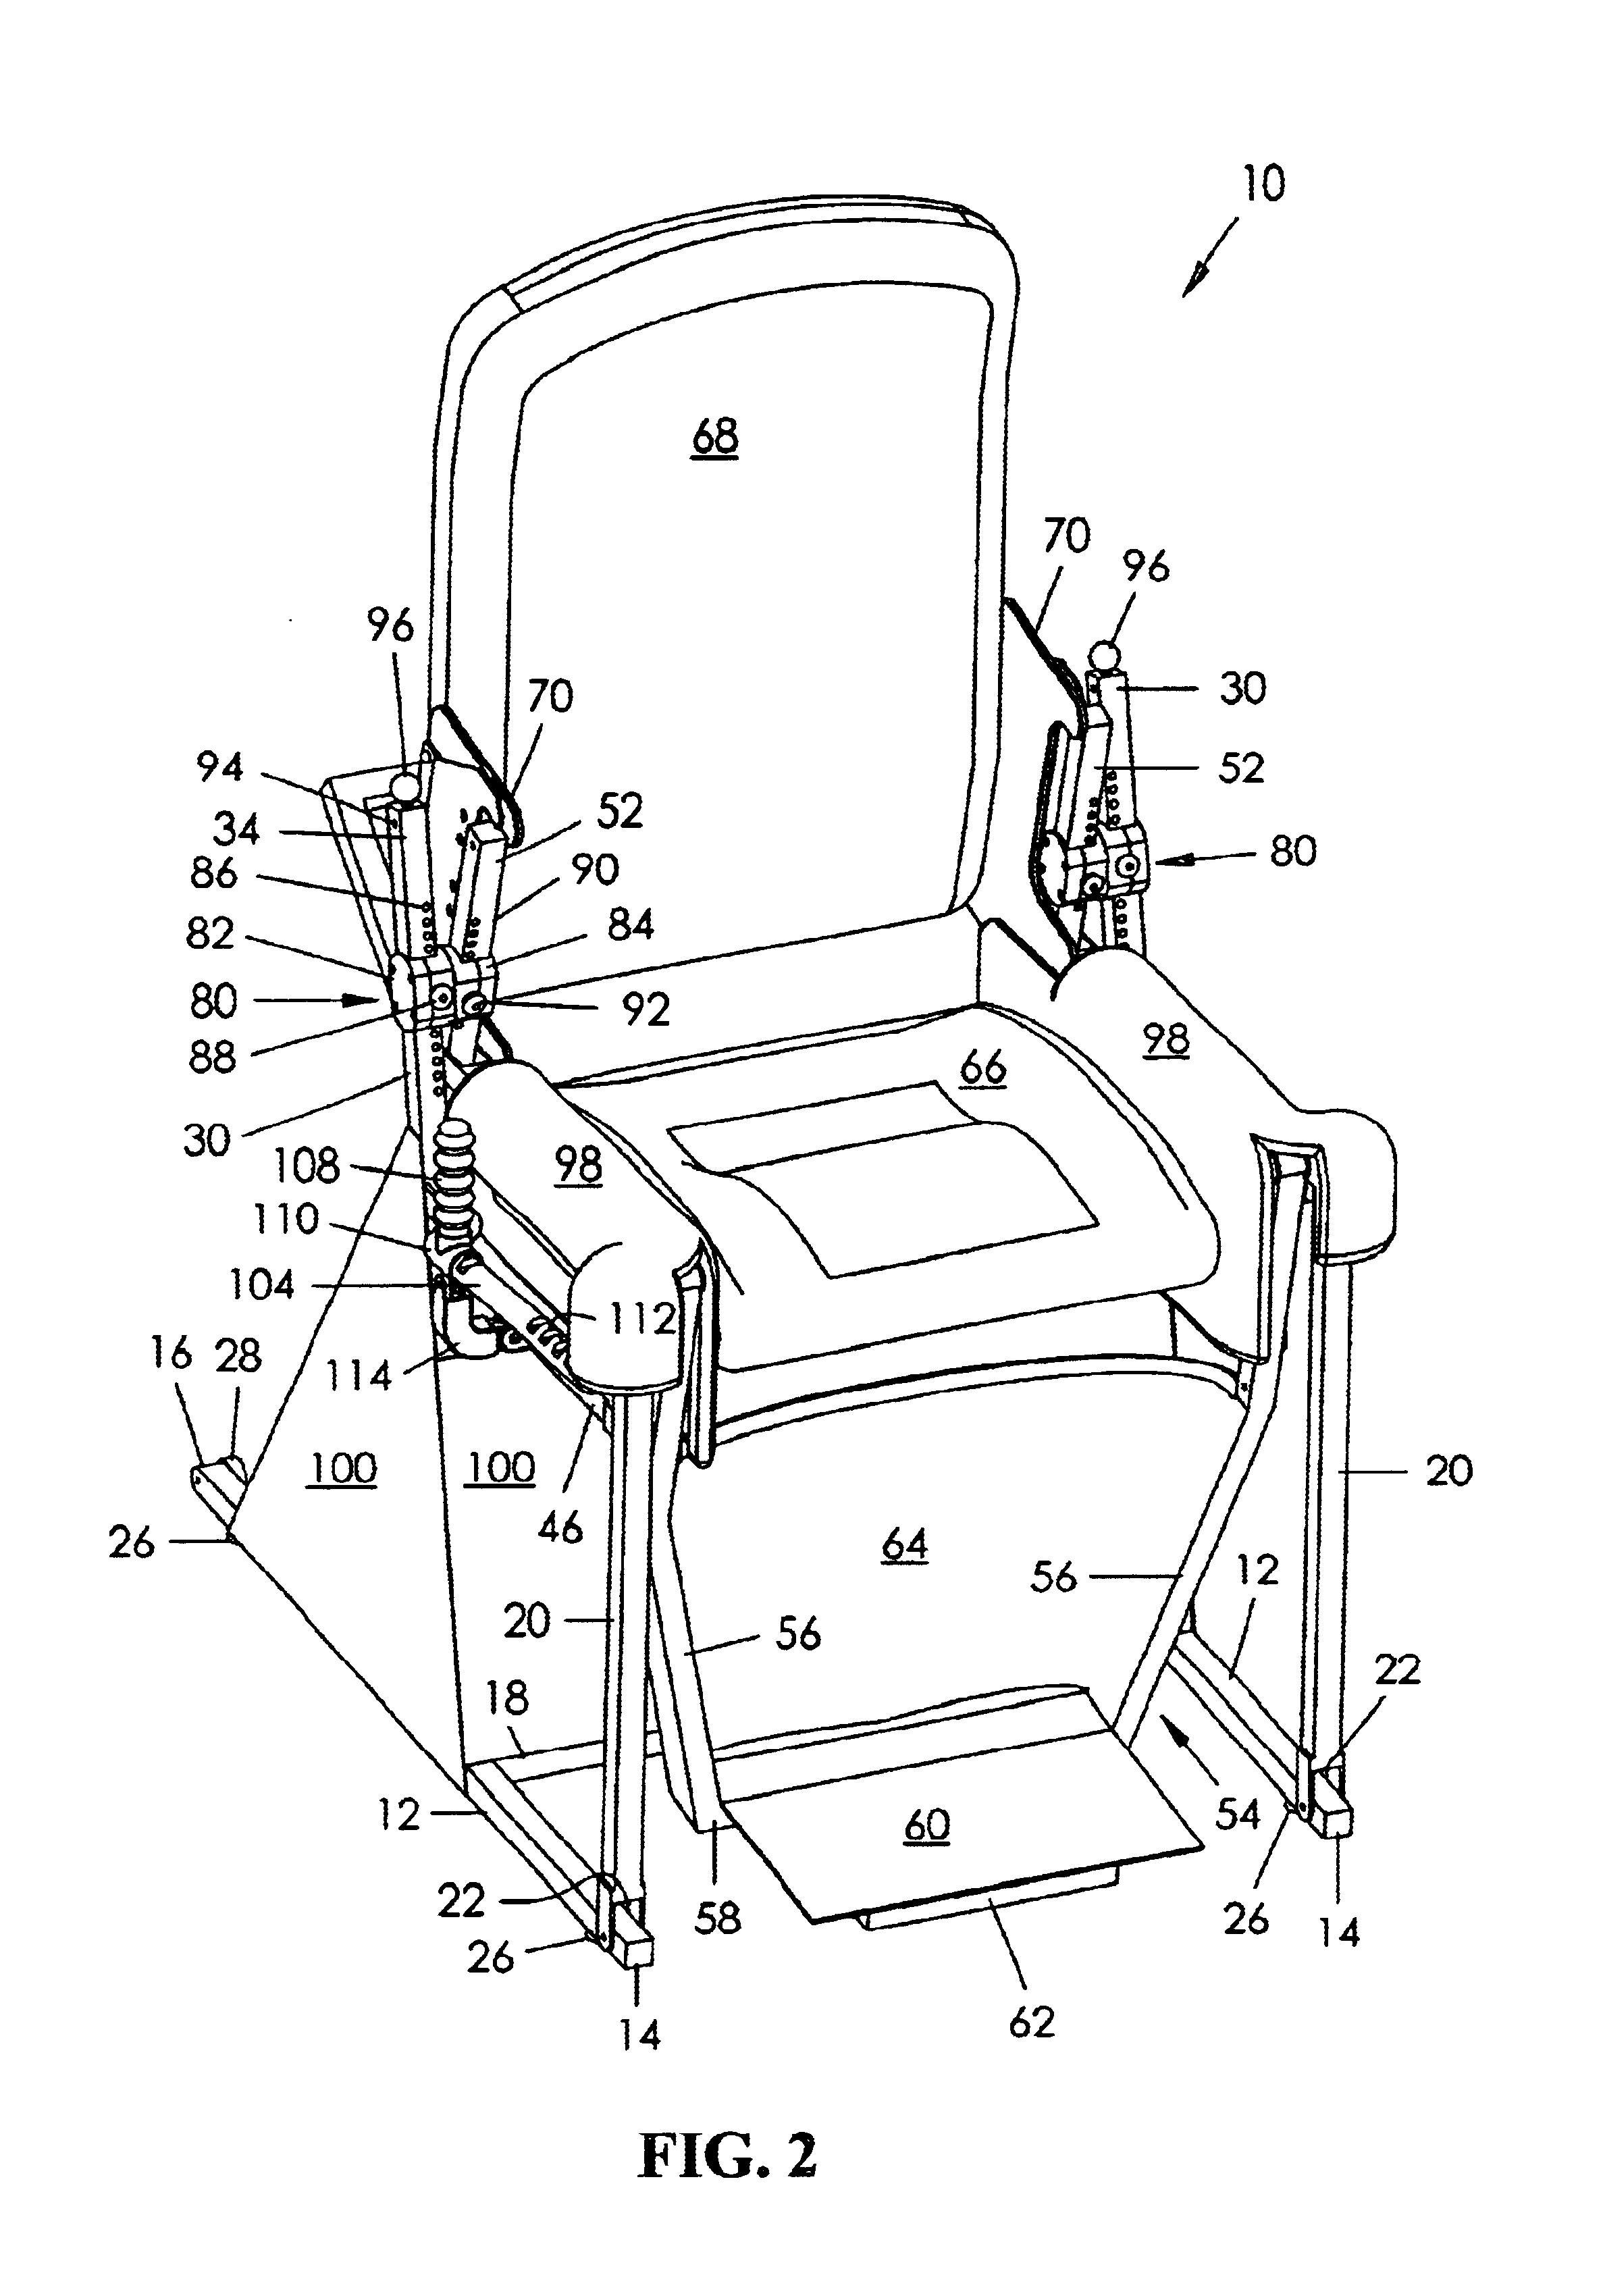 Low-resistance exercise and rehabilitation chair